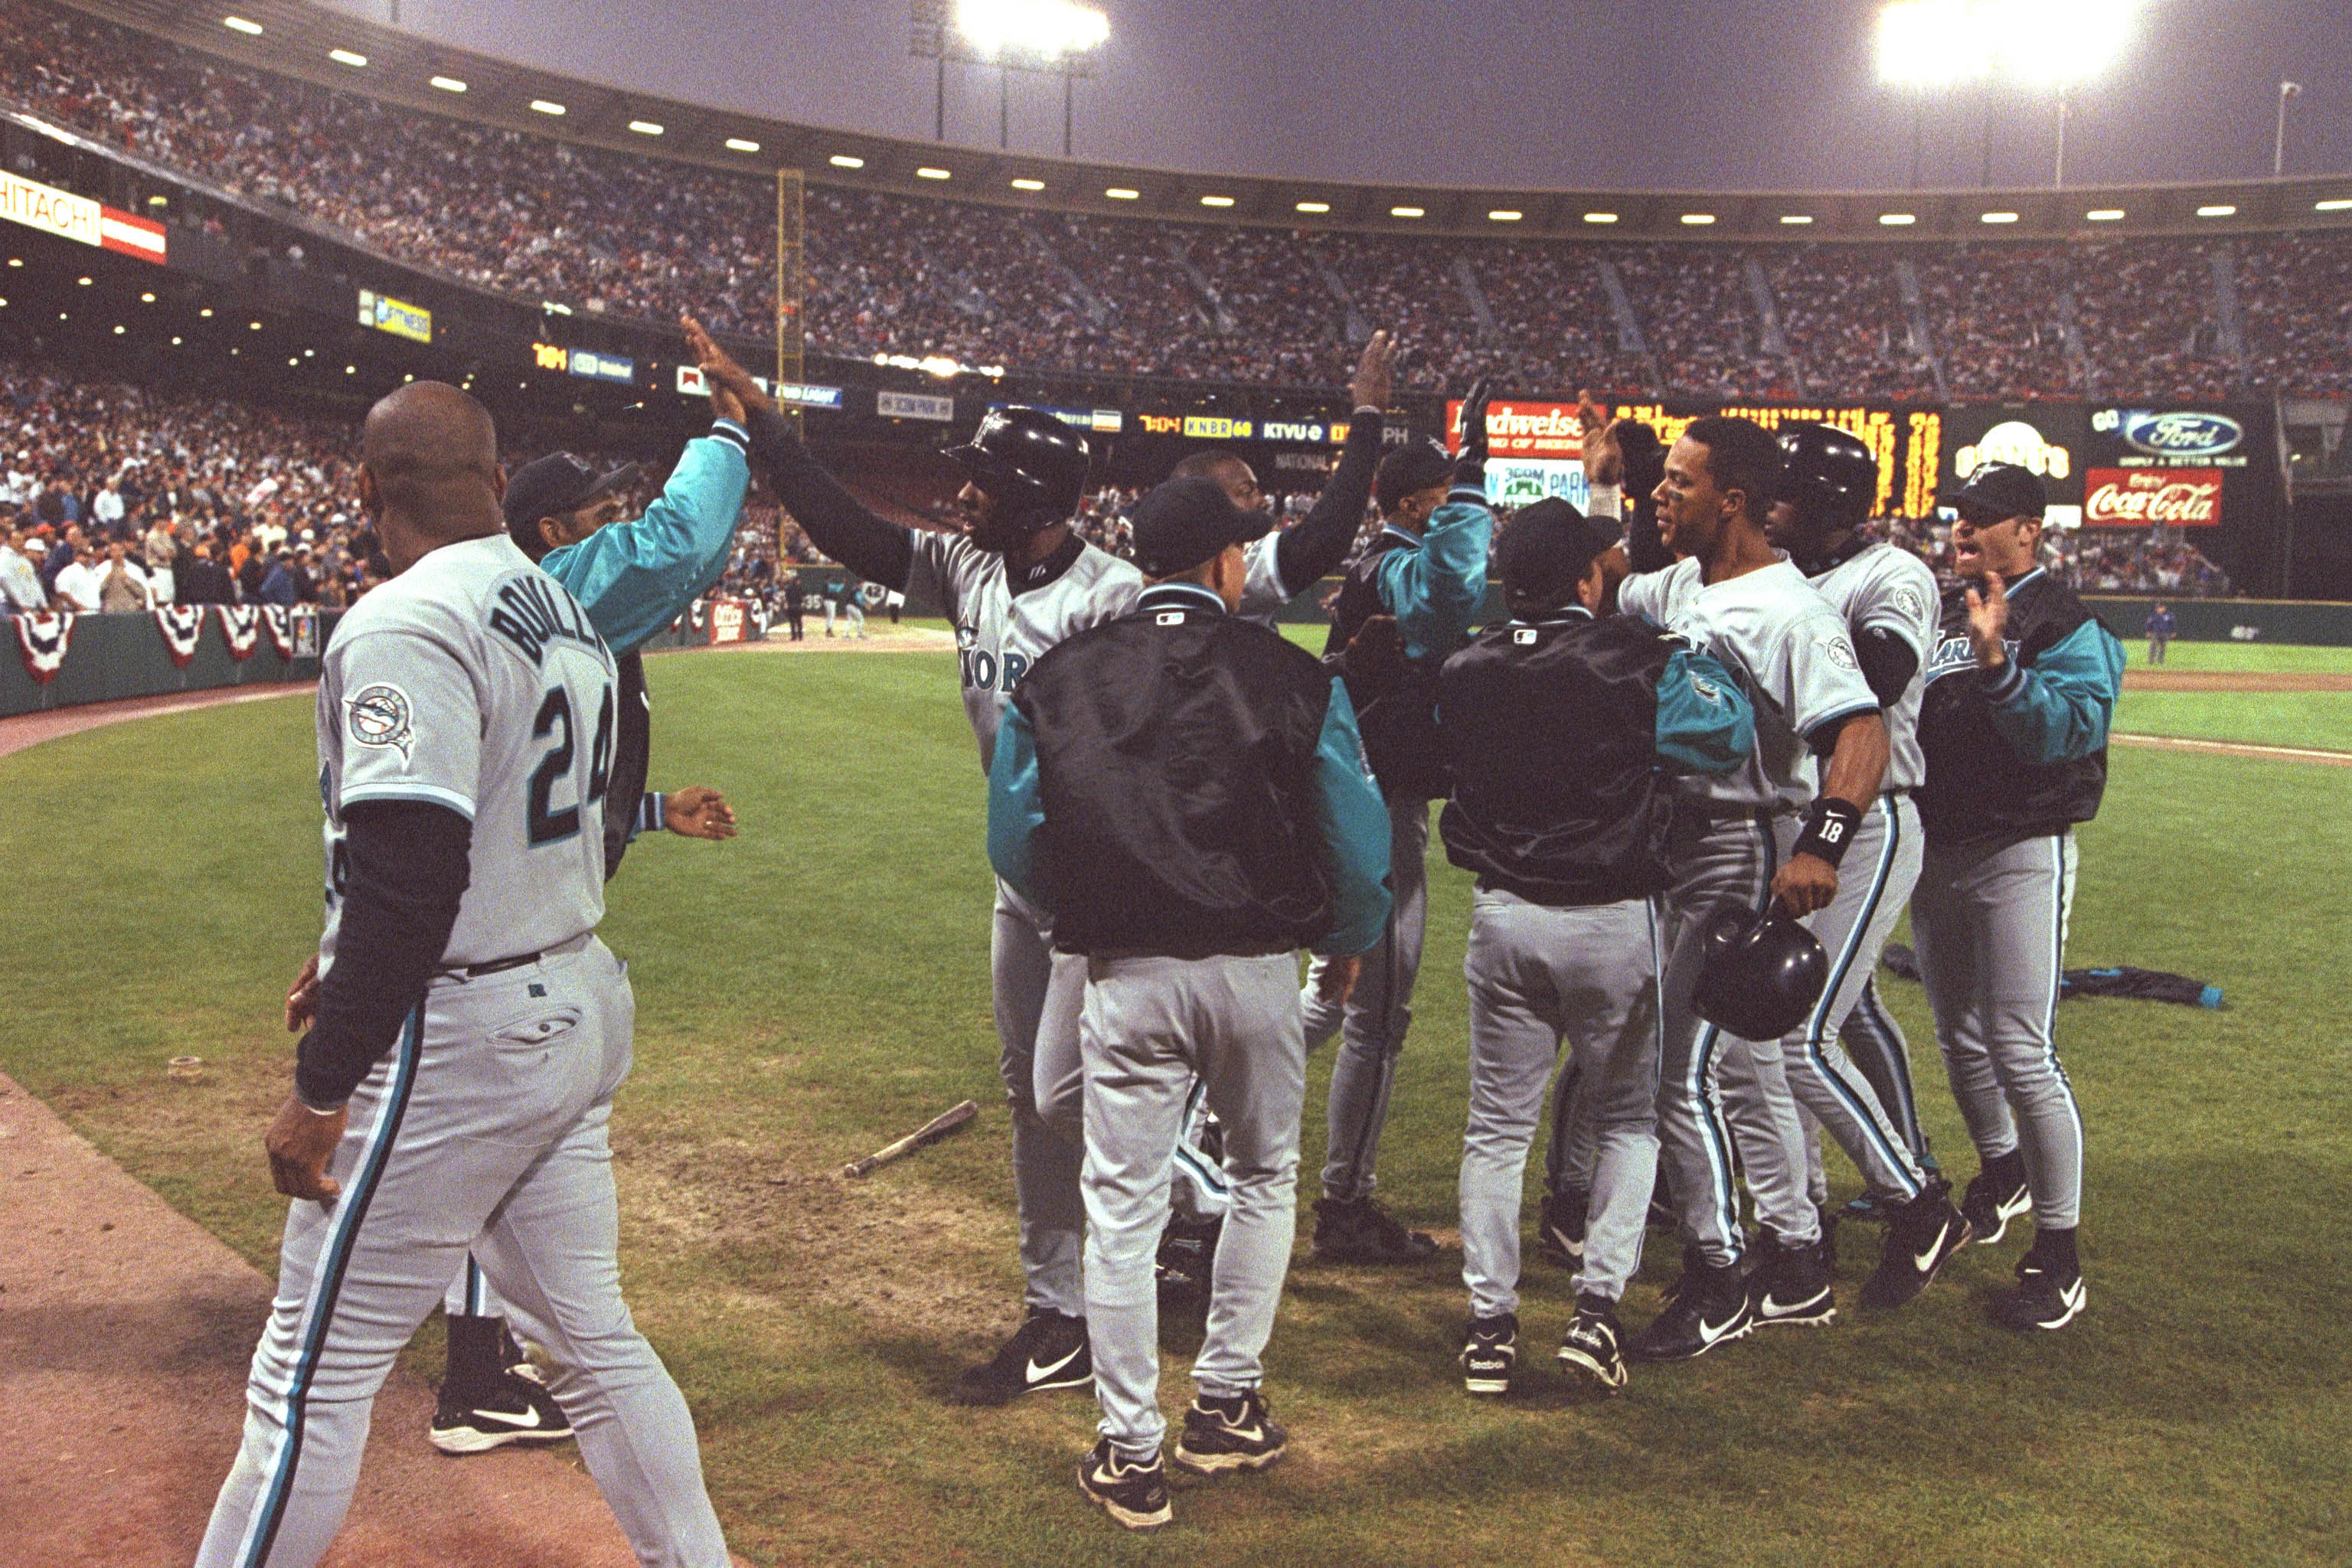 Florida Marlins players celebrate Devon White’s grand slam home run against the San Francisco Giants on Oct. 3, 1997 at Candlestick Park in San Francisco. The Marlins beat the Giants 6-2 to sweep their N.L. Division Series in three games.